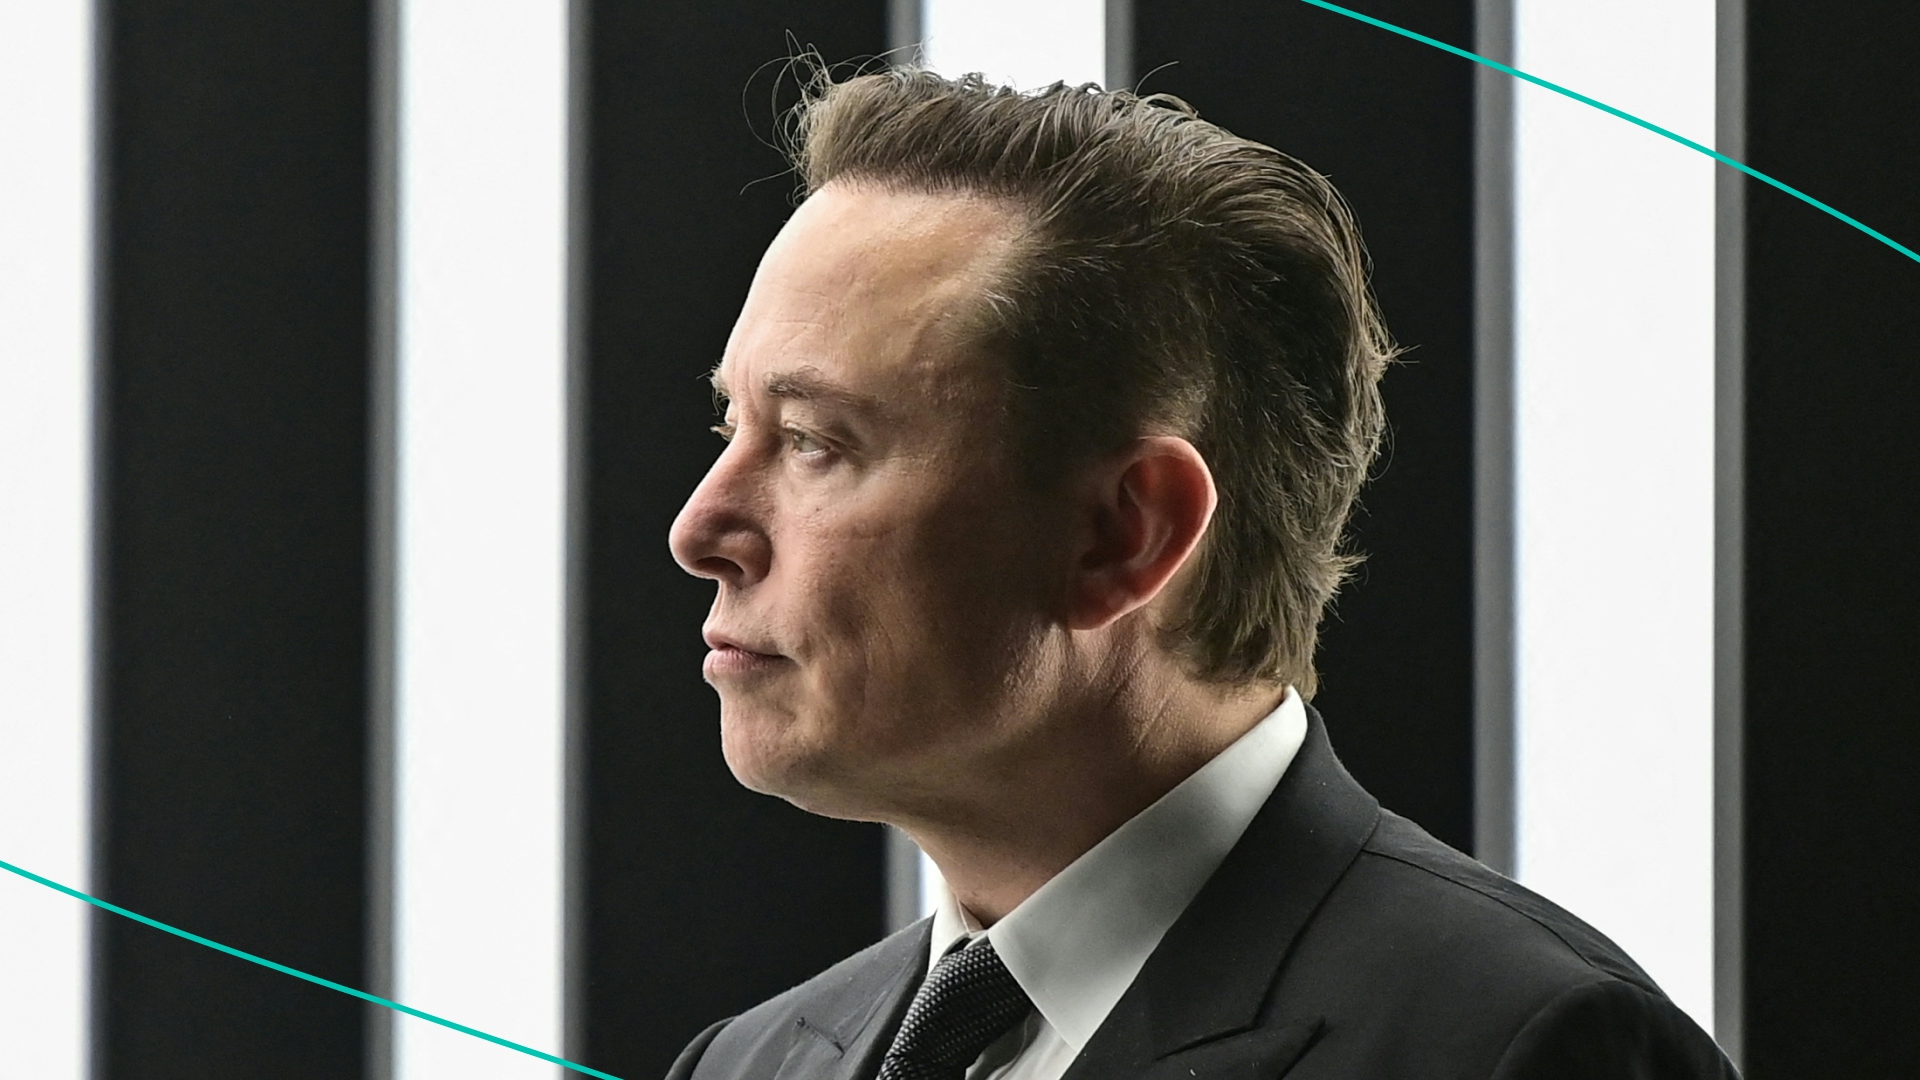 Tesla CEO Elon Musk is pictured as he attends the start of the production at Tesla's "Gigafactory" on March 22, 2022